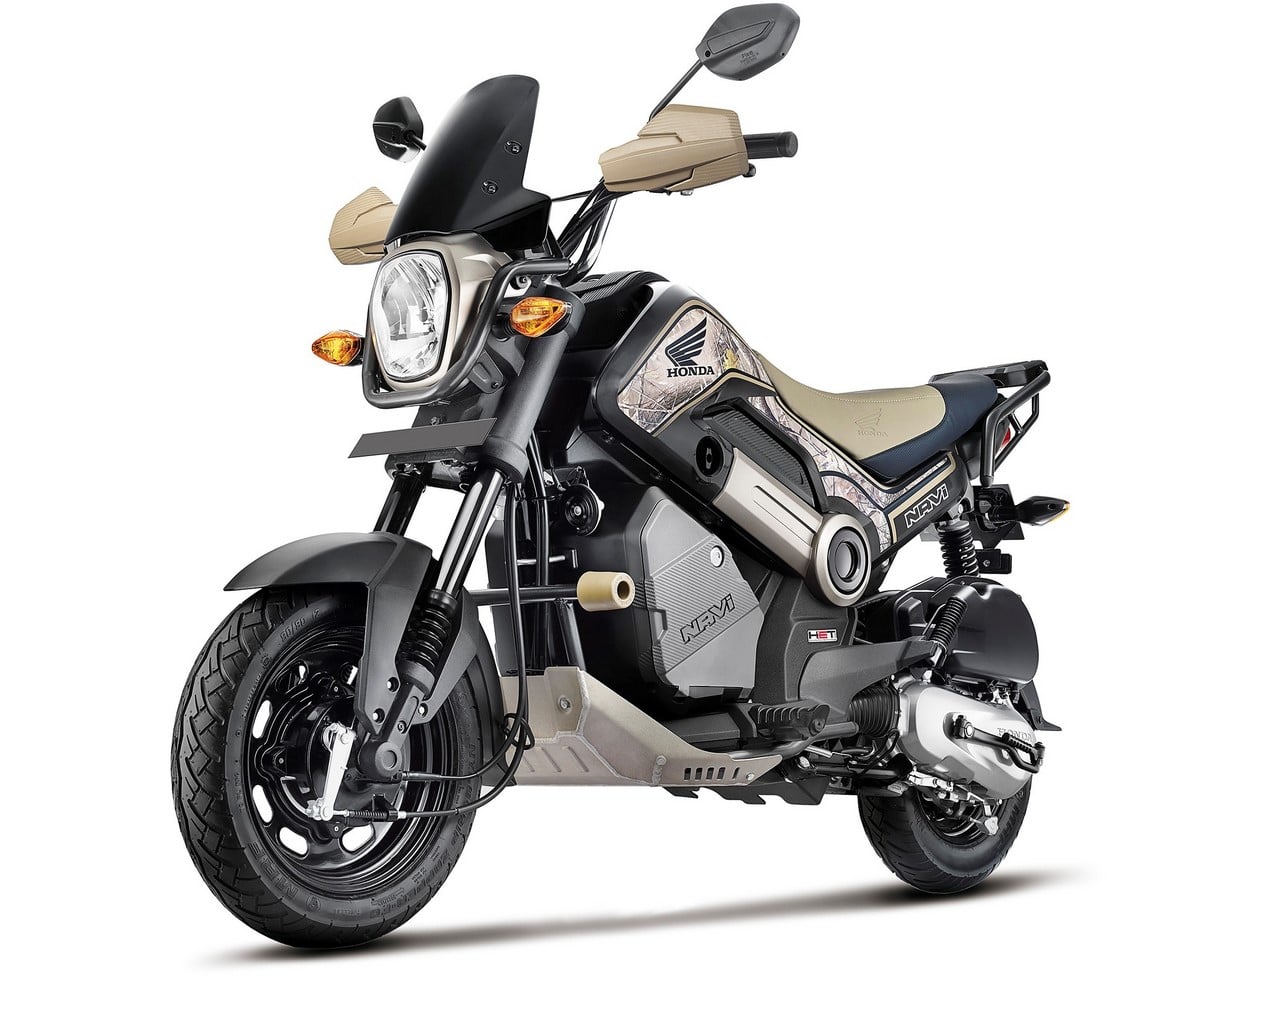 Honda Navi Price, Mileage, Specs And Features You Need To Know